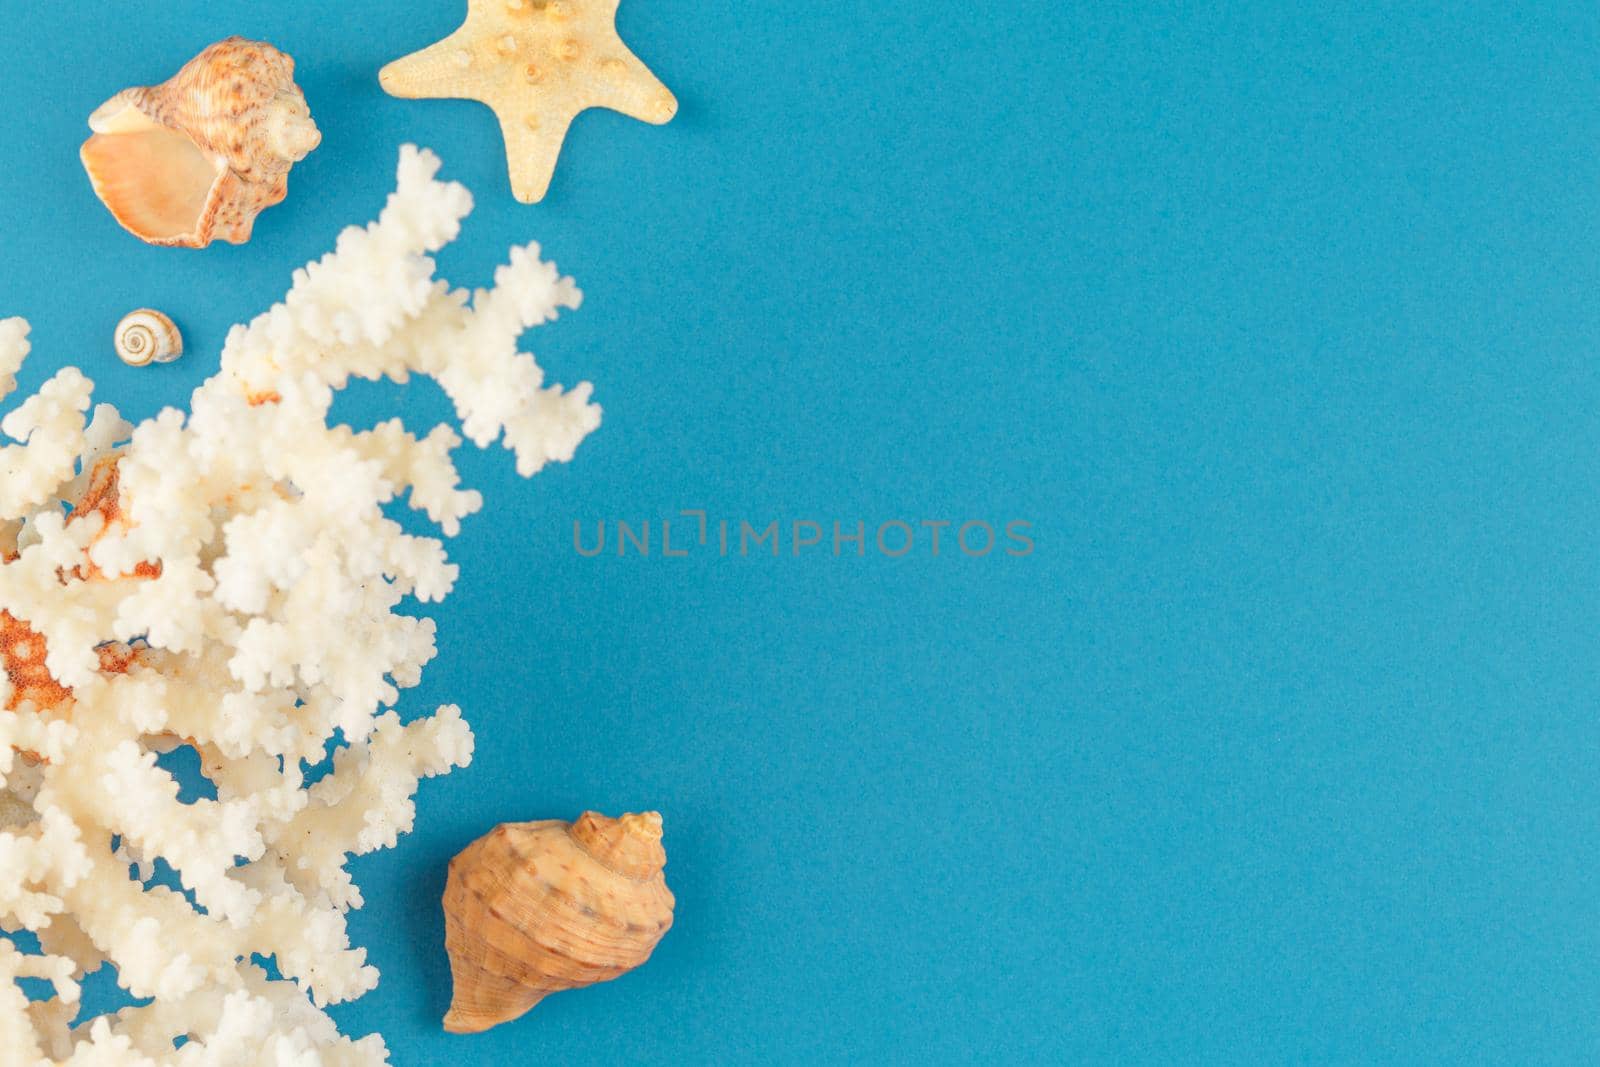 Corals and starfishes on a blue isolated background. Top view. Summertime holiday vacation concept. Flat lay. Banner with seashells close up.